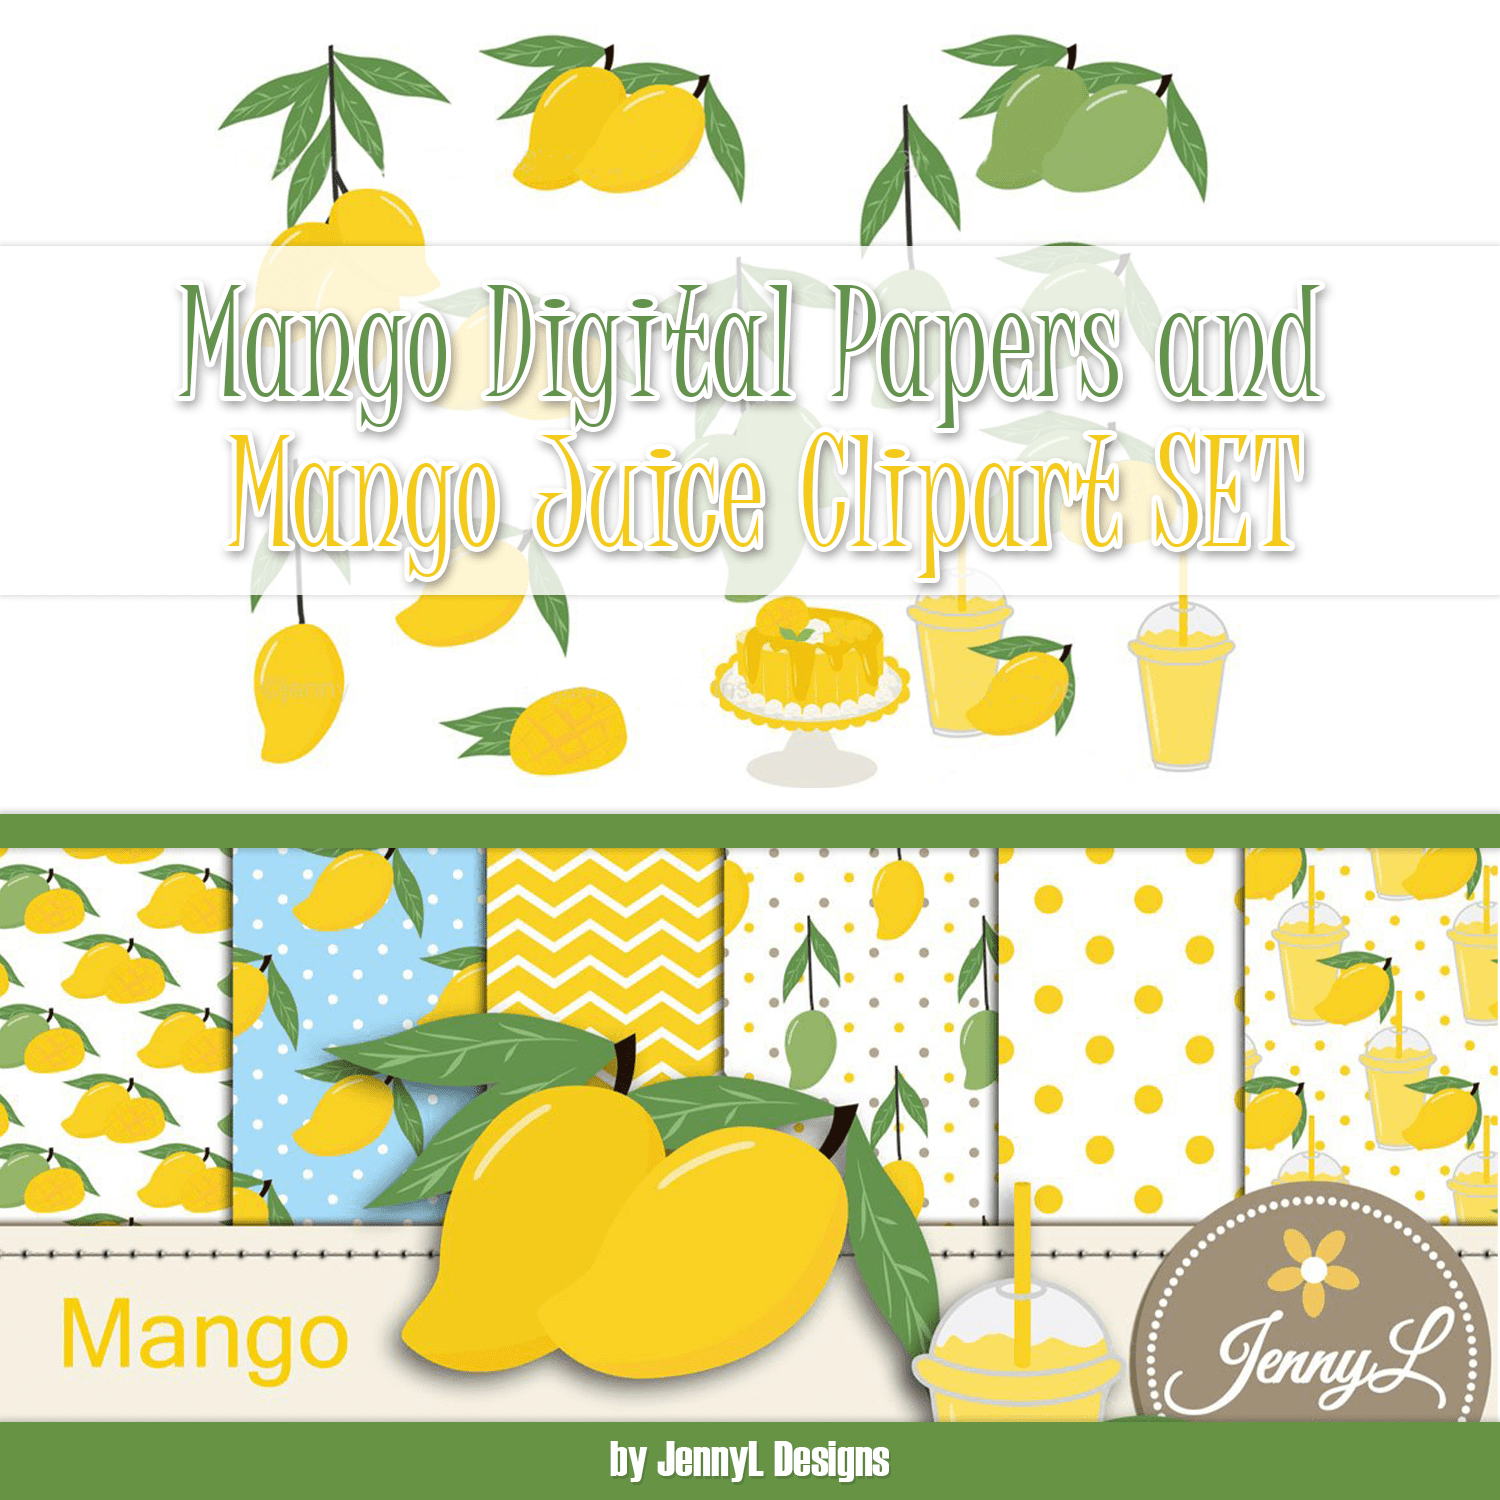 Mango Digital Papers and Mango Juice Clipart SET created by JennyL Designs.